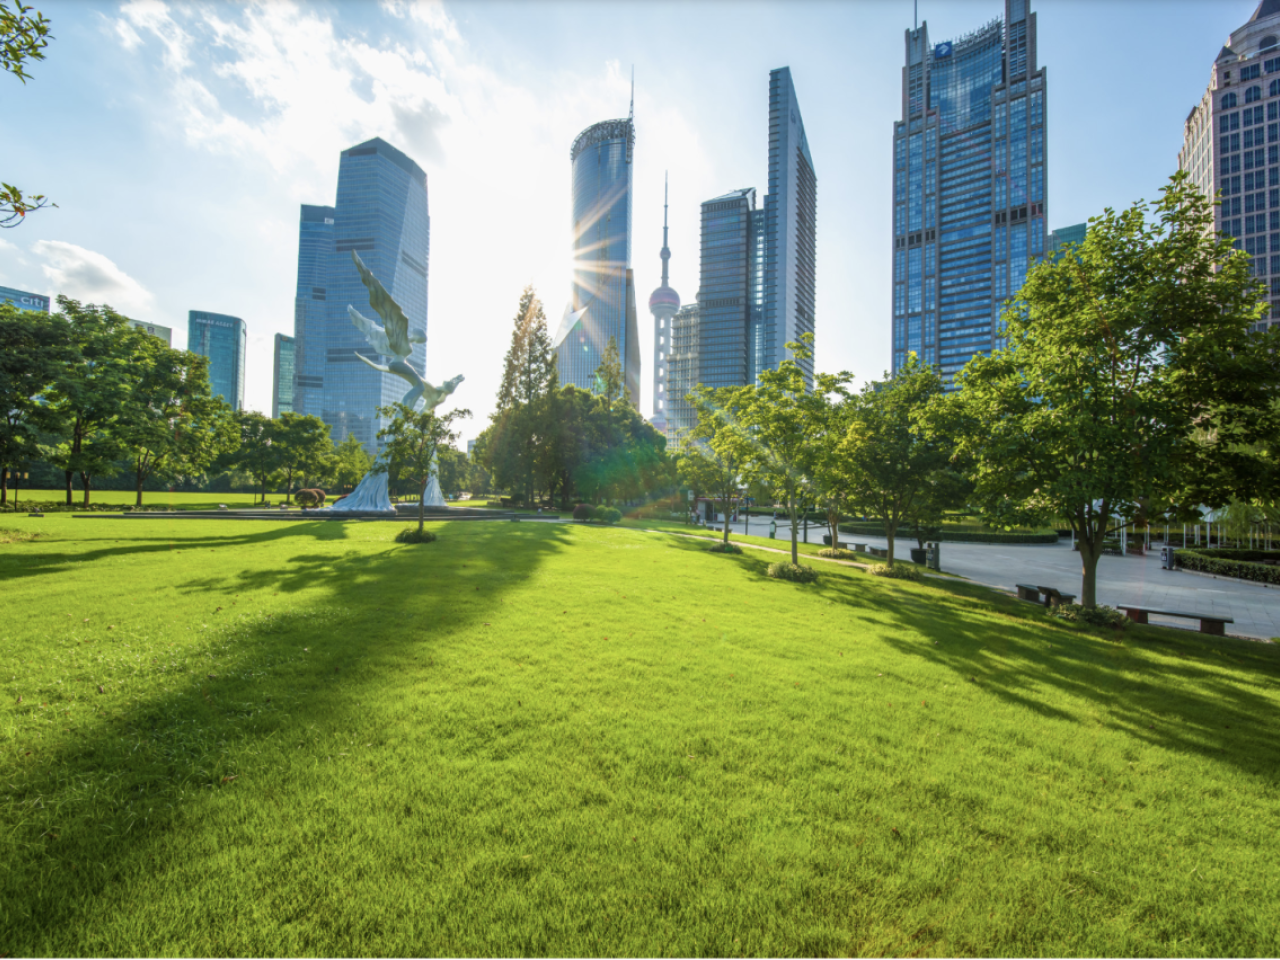 Sunny park surrounded by tall buildings